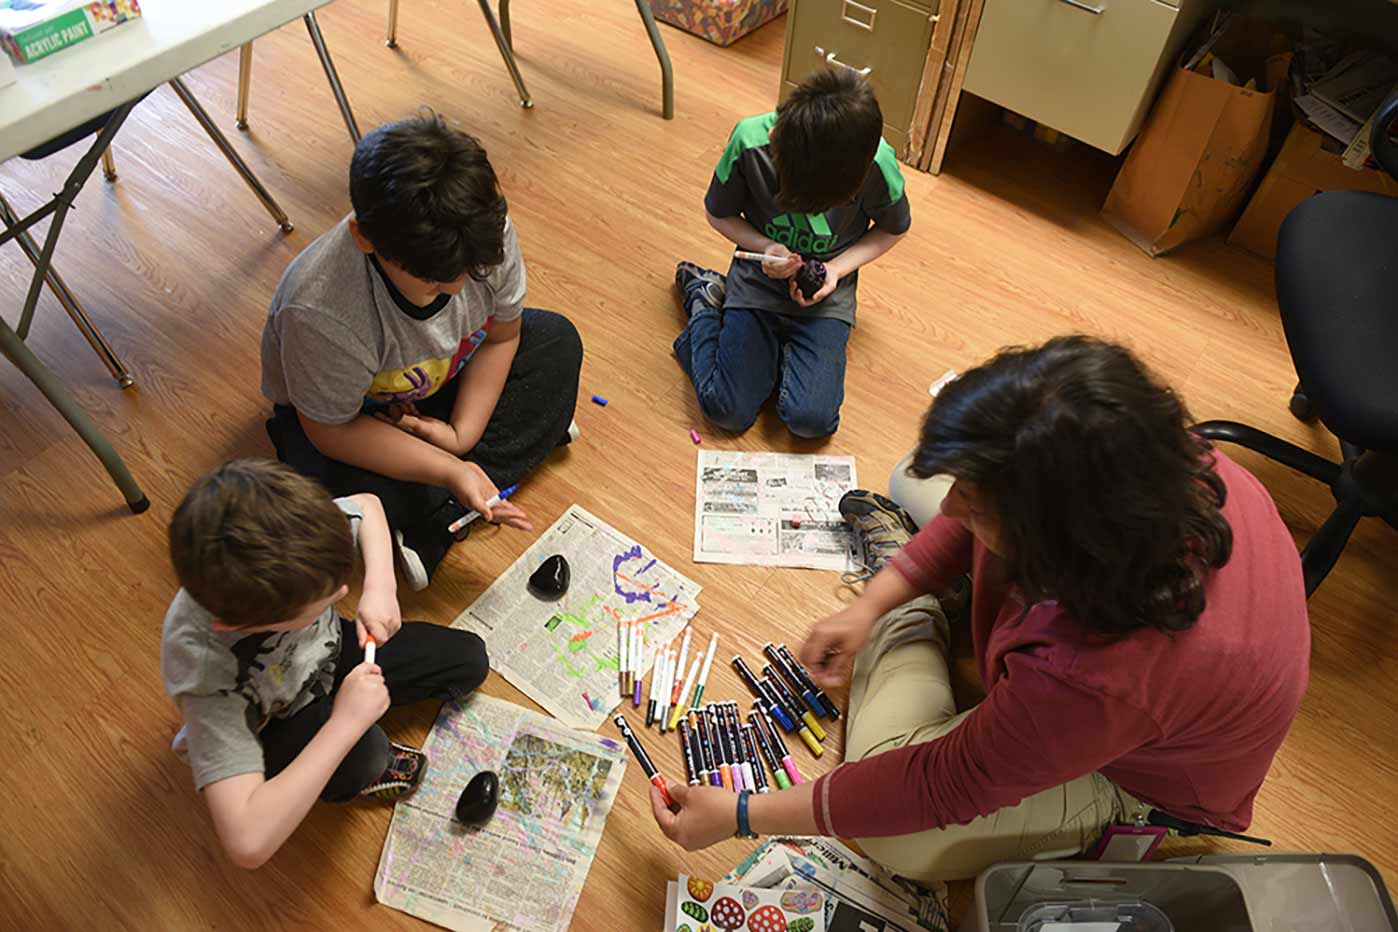 Three young Natchaug students work with a teacher to decorate rocks with paint markers